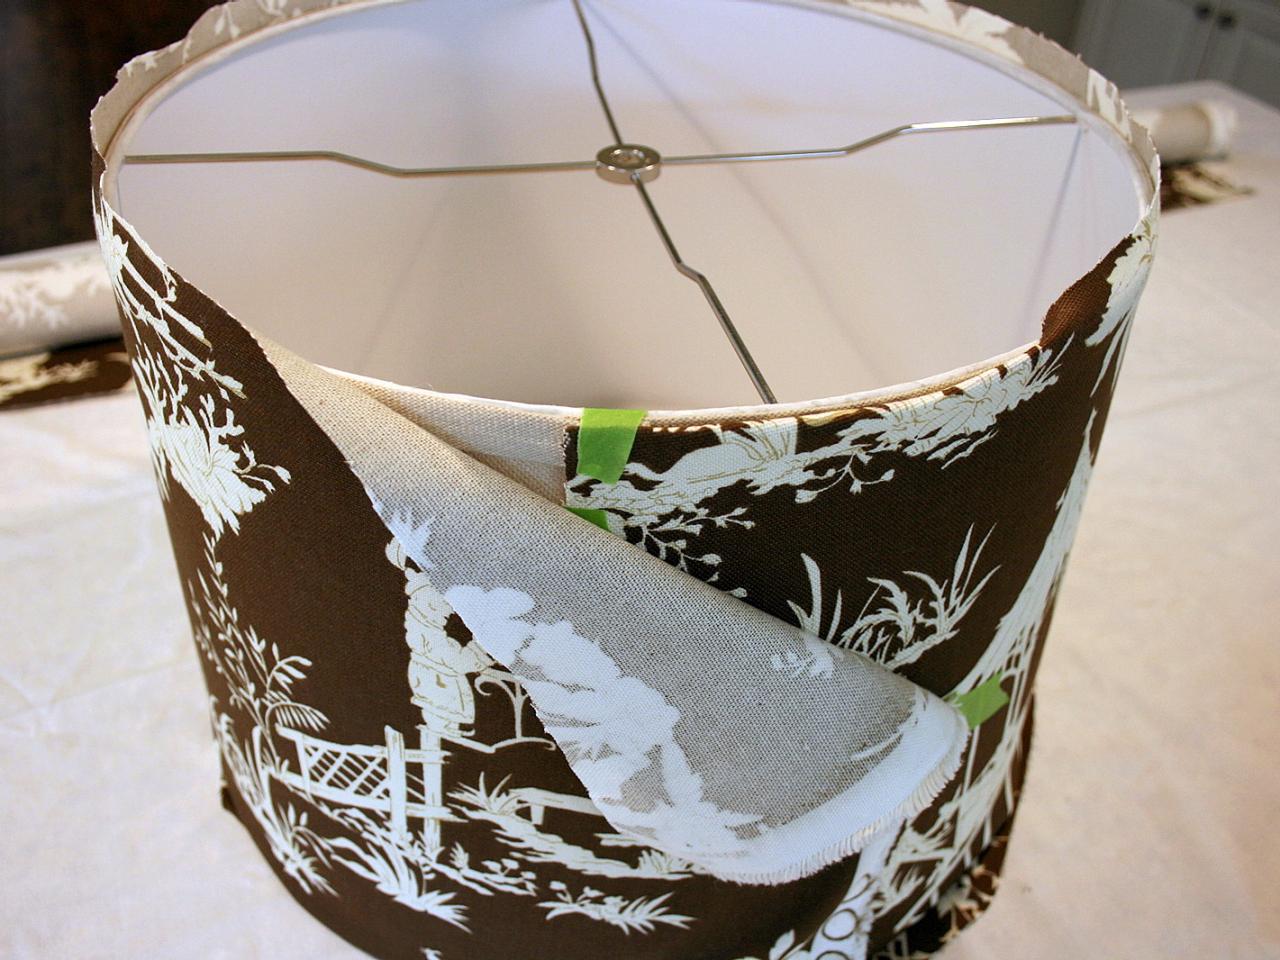 Custom Fabric Covered Lampshade, Covering A Lampshade With Fabric Instructions